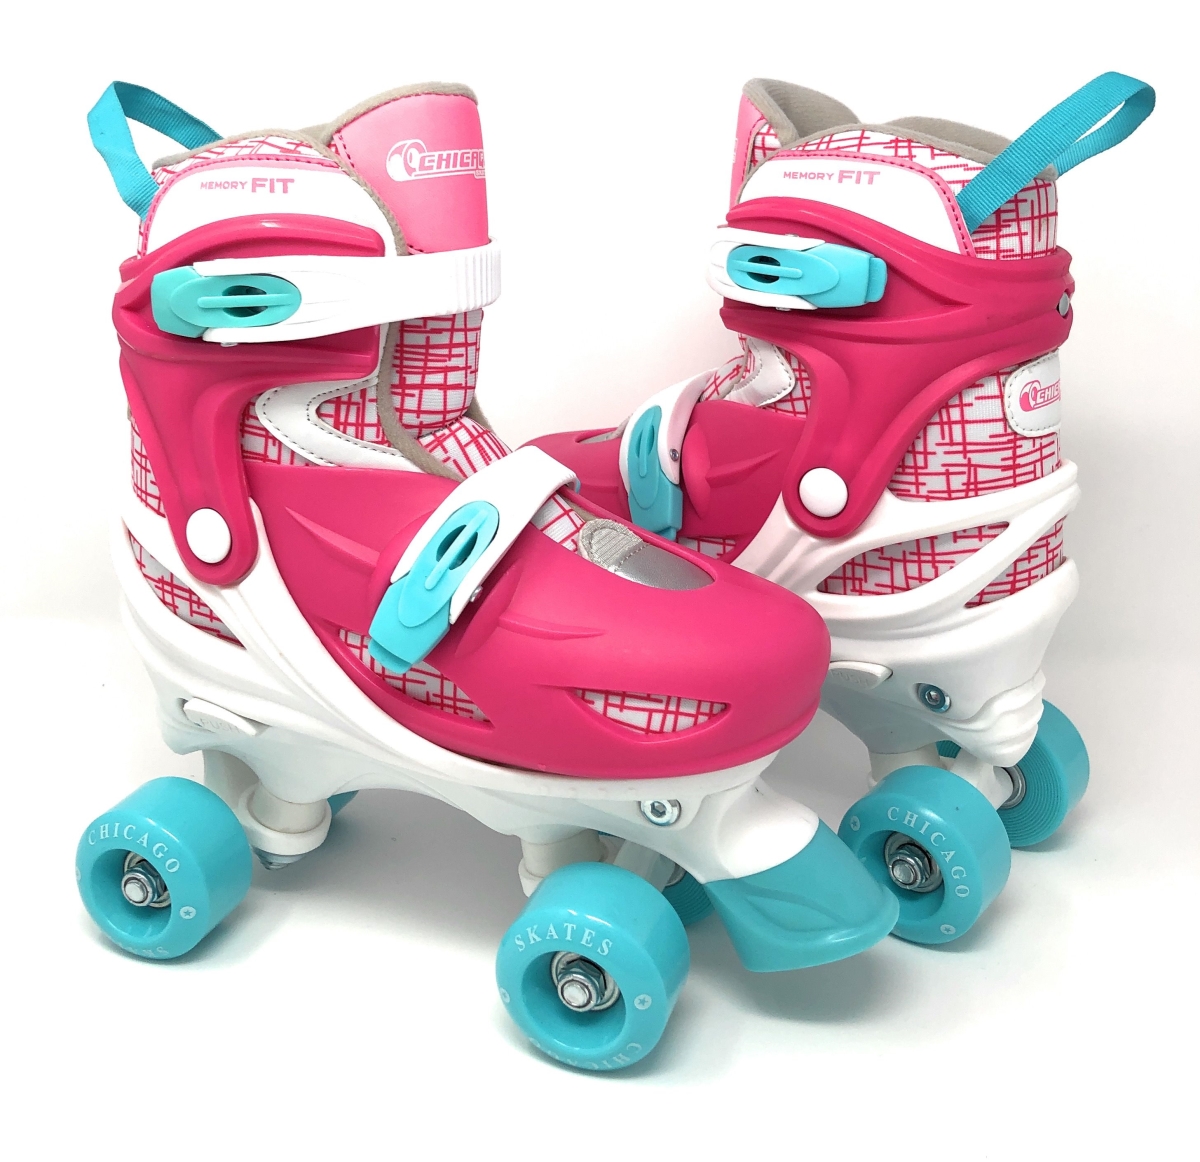 Picture of Chicago Skates CRS138G-S Pink & White Small Girls Quad Roller Skates Combo with Protective Gear - Size J10-J13